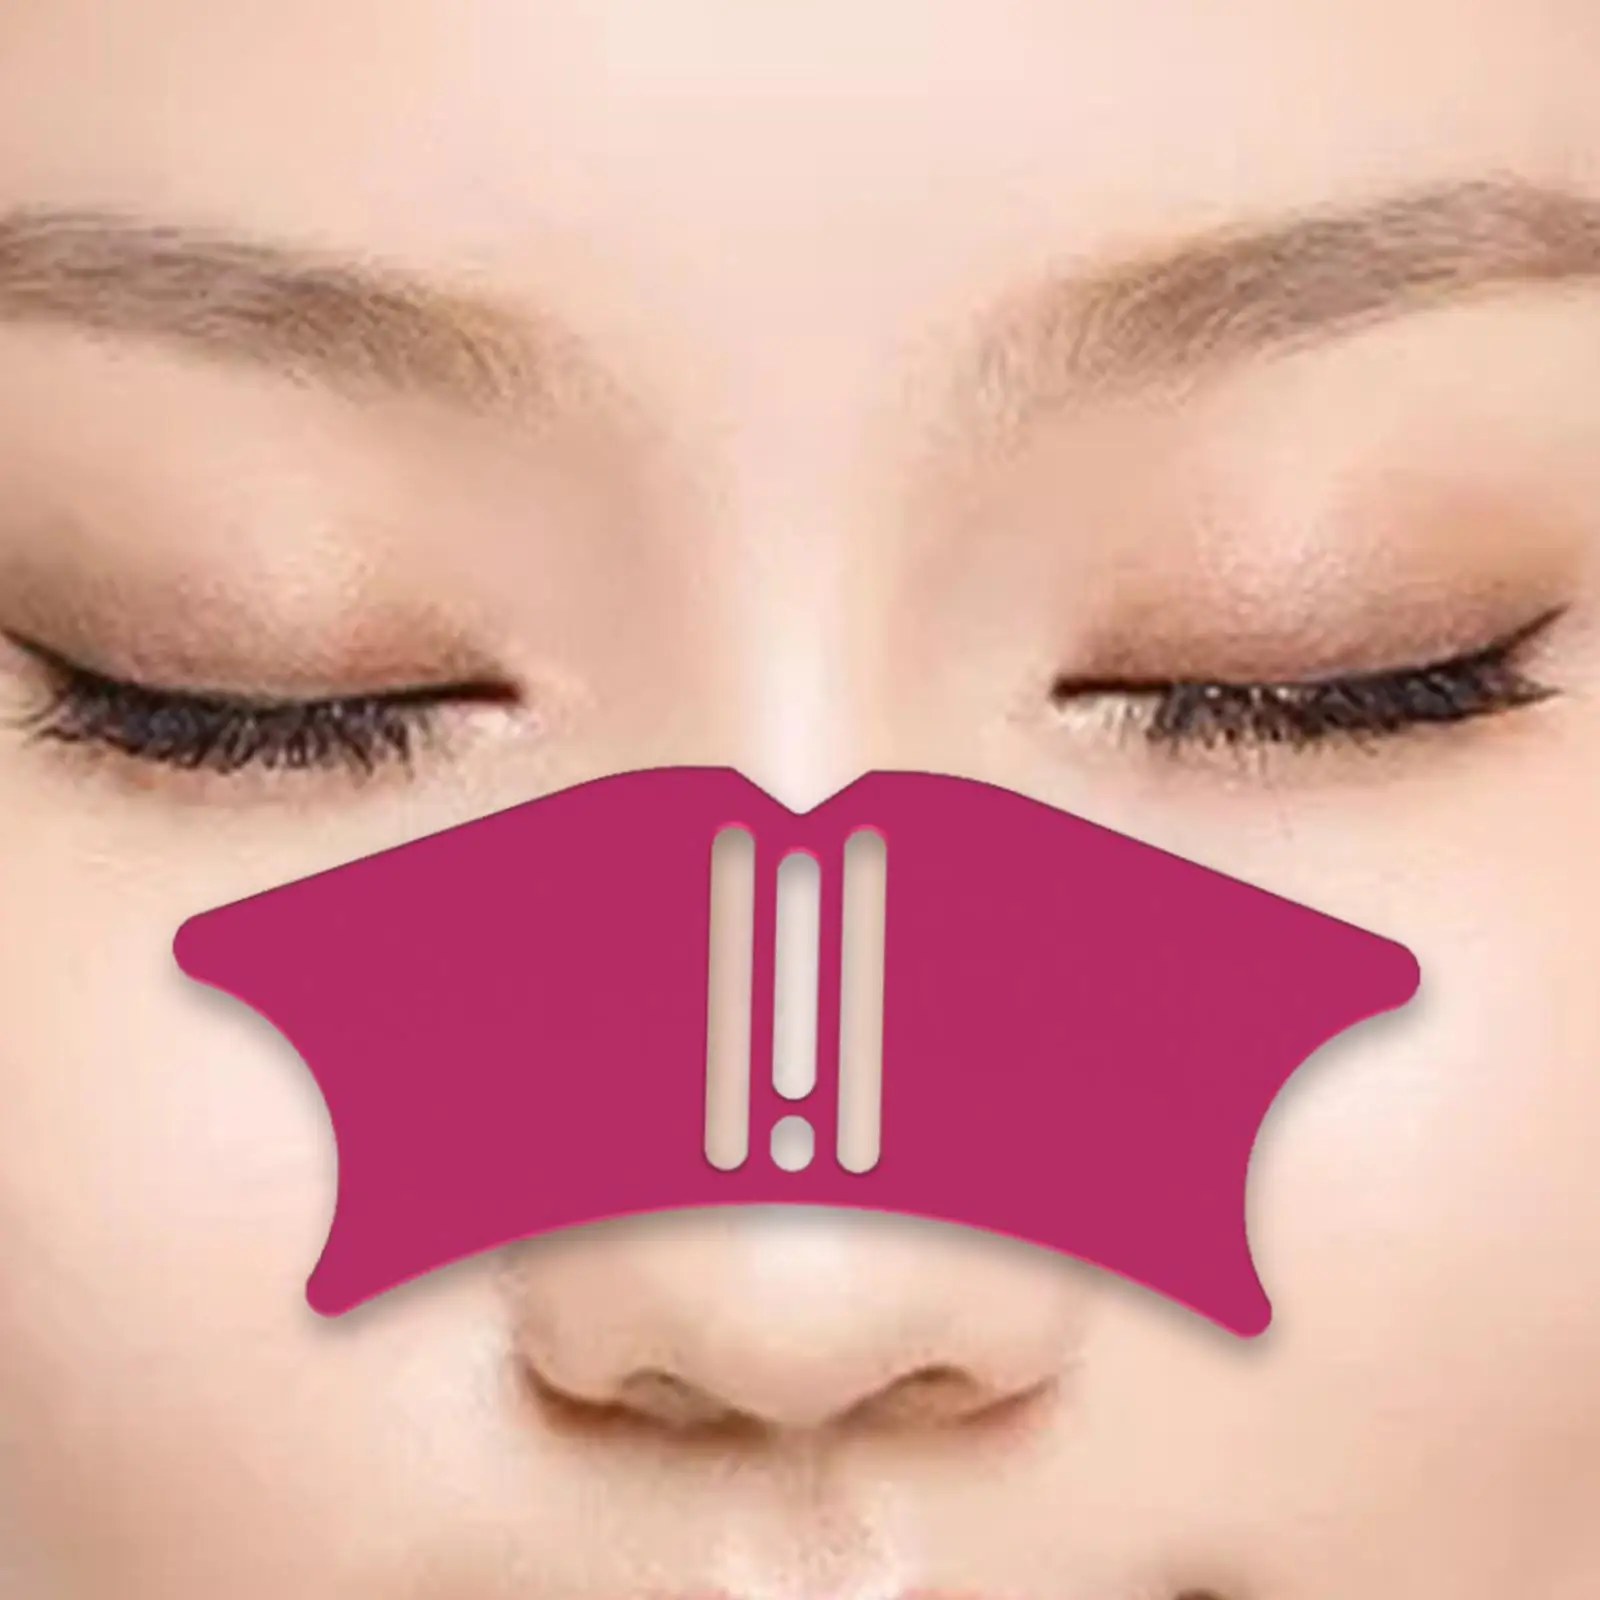 Eyebrow Shaping Stencil Silicone Makeup Tool Nose Stencil Flexible Lightweight Multifunctional Template